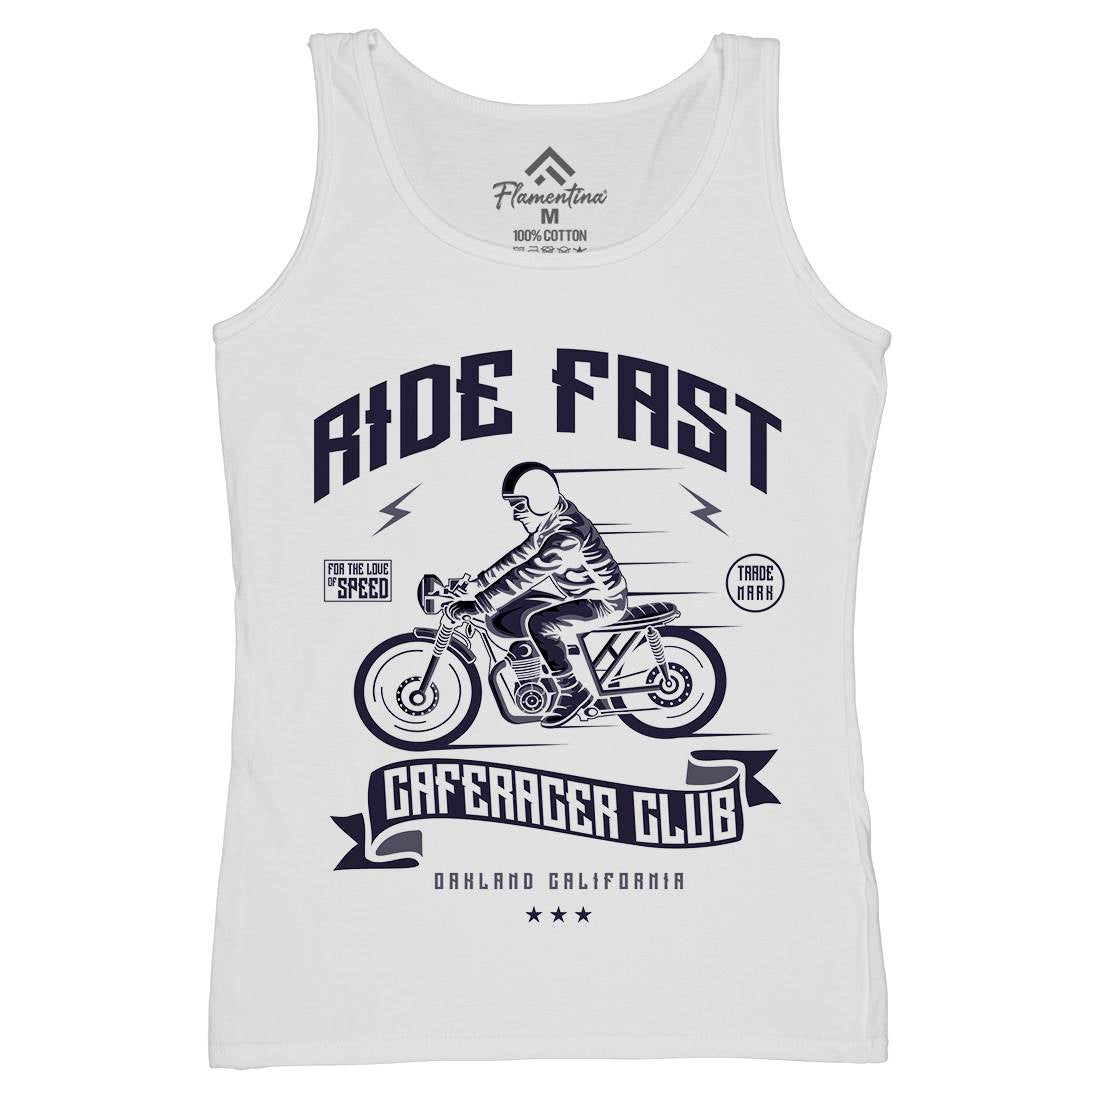 Ride Fast Womens Organic Tank Top Vest Motorcycles A117